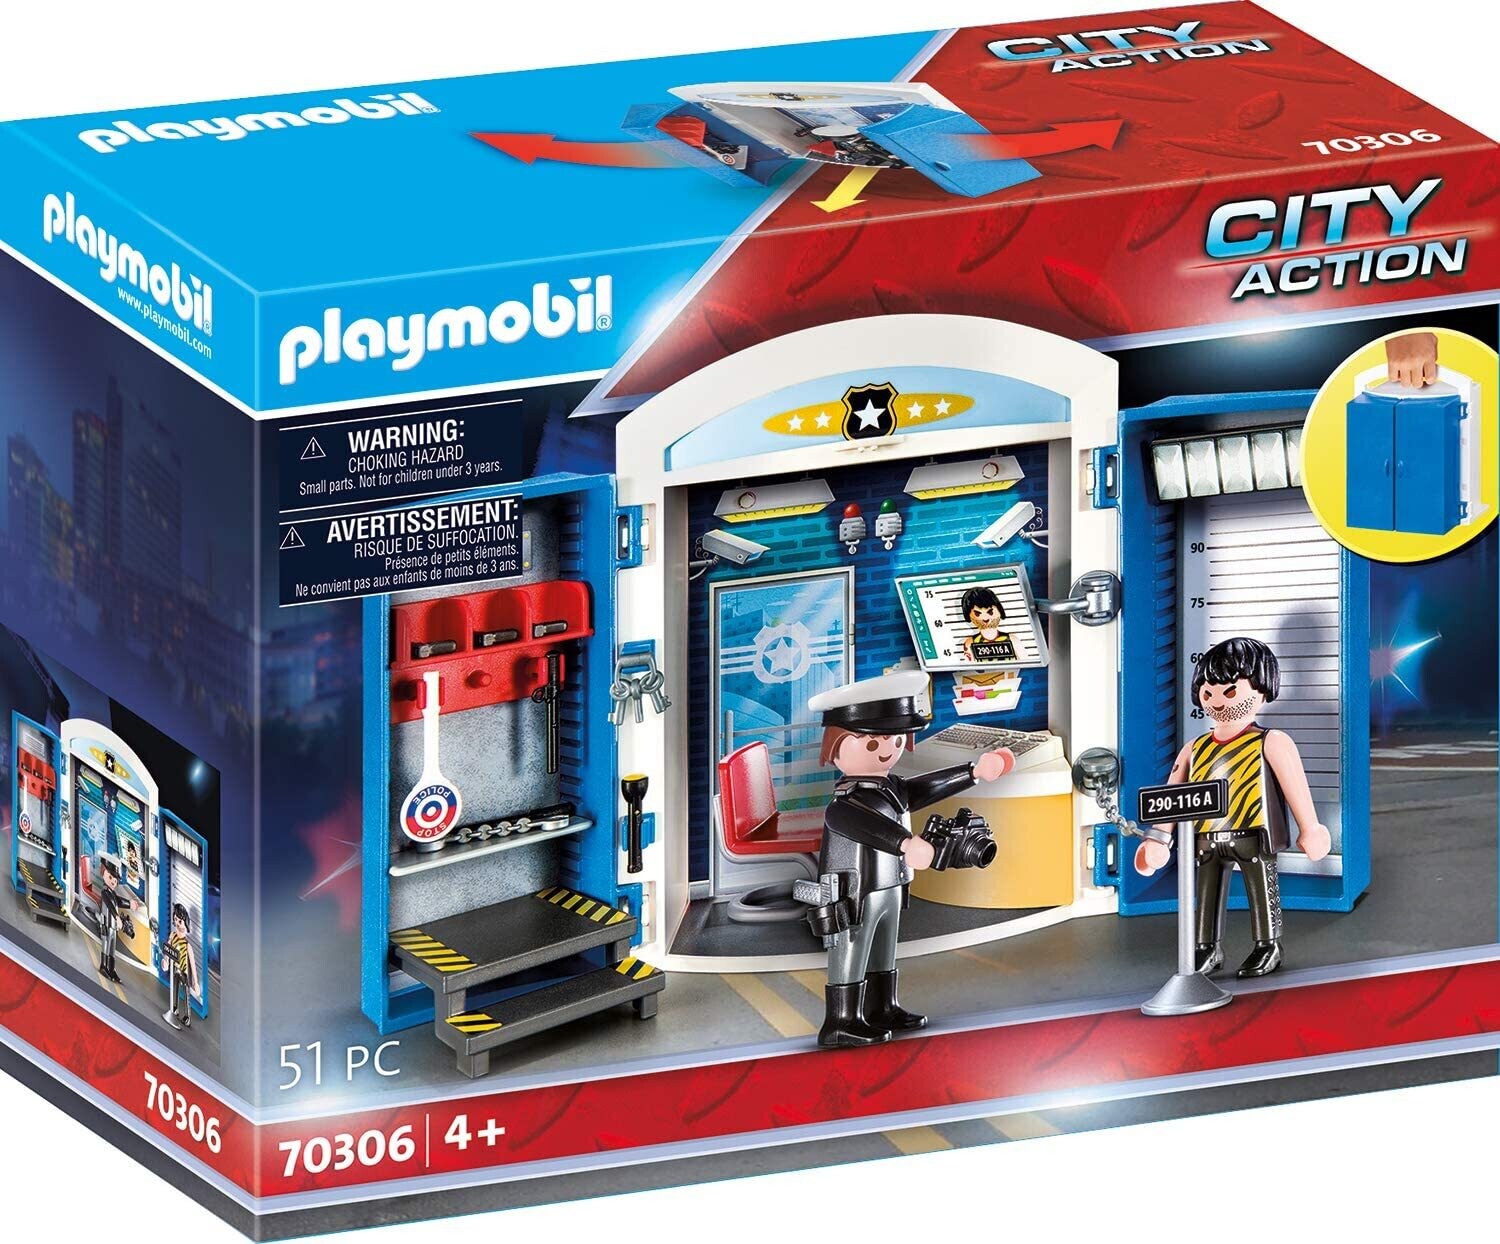 Playmobil City Action Police Station Play Box 70306